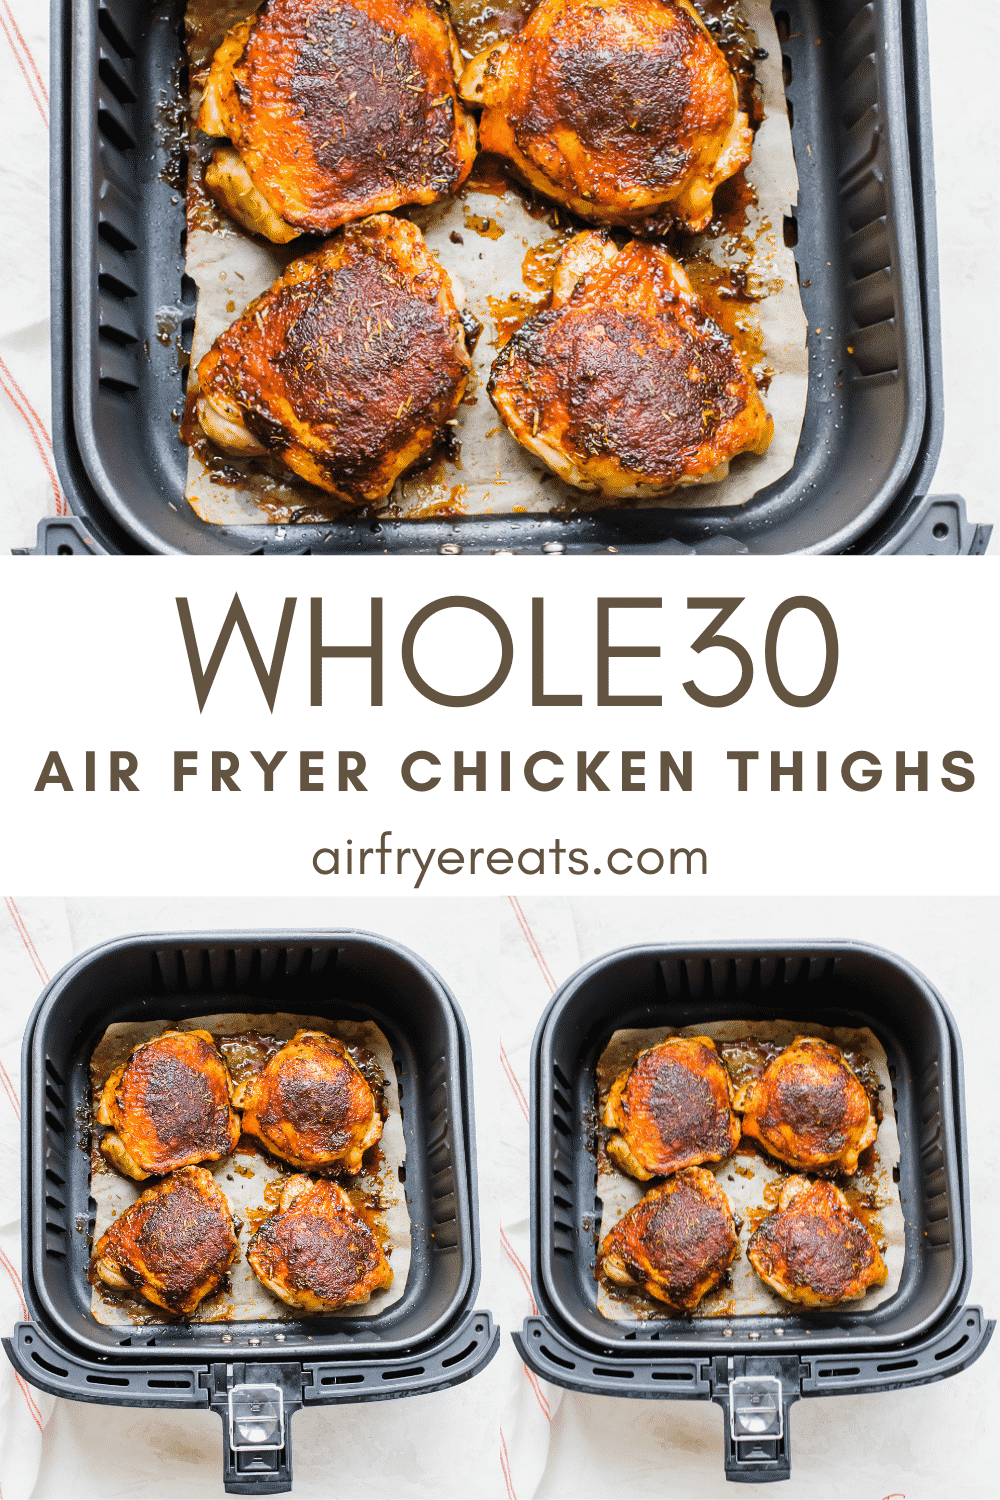 These Air Fryer Chicken Thighs are moist inside and crispy outside! This 30-minute meal is a family favorite made from simple pantry staples. #airfryerchickenthighs #chickenthighs #italianchickenthighs via @vegetarianmamma